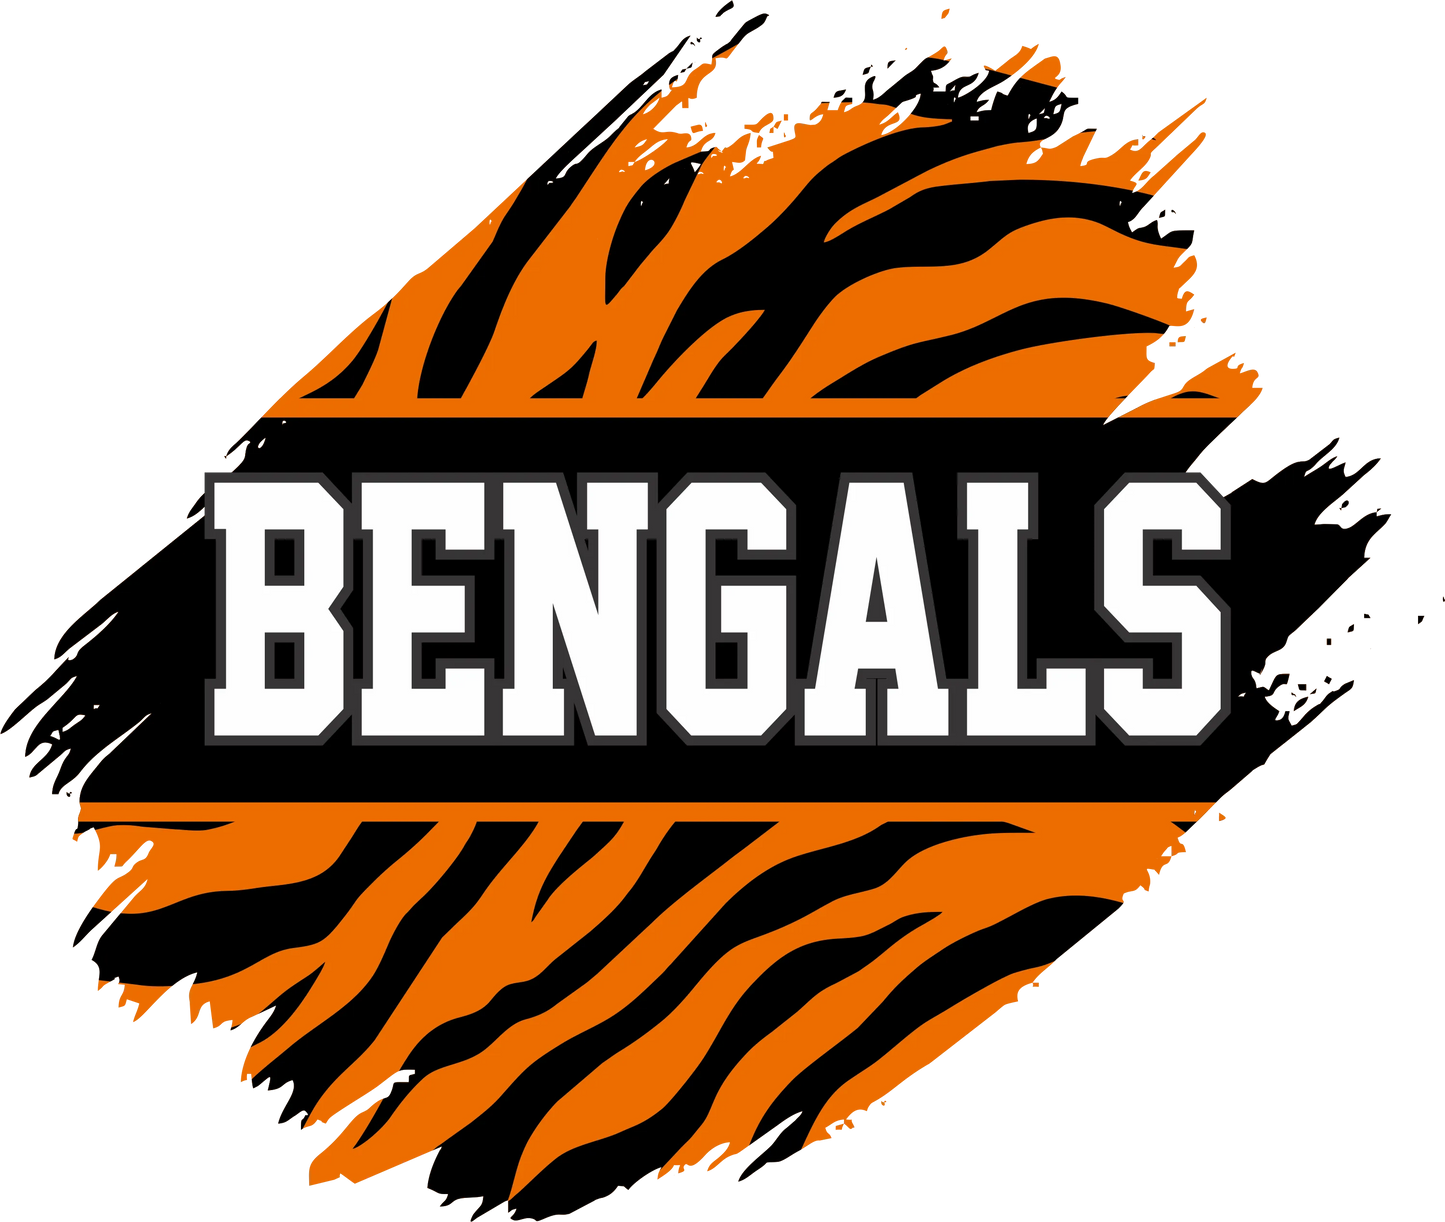 CB7 - "Bengals W/ Stripes" DTF Transfer, DTF Transfer, Apparel & Accessories, Ace DTF